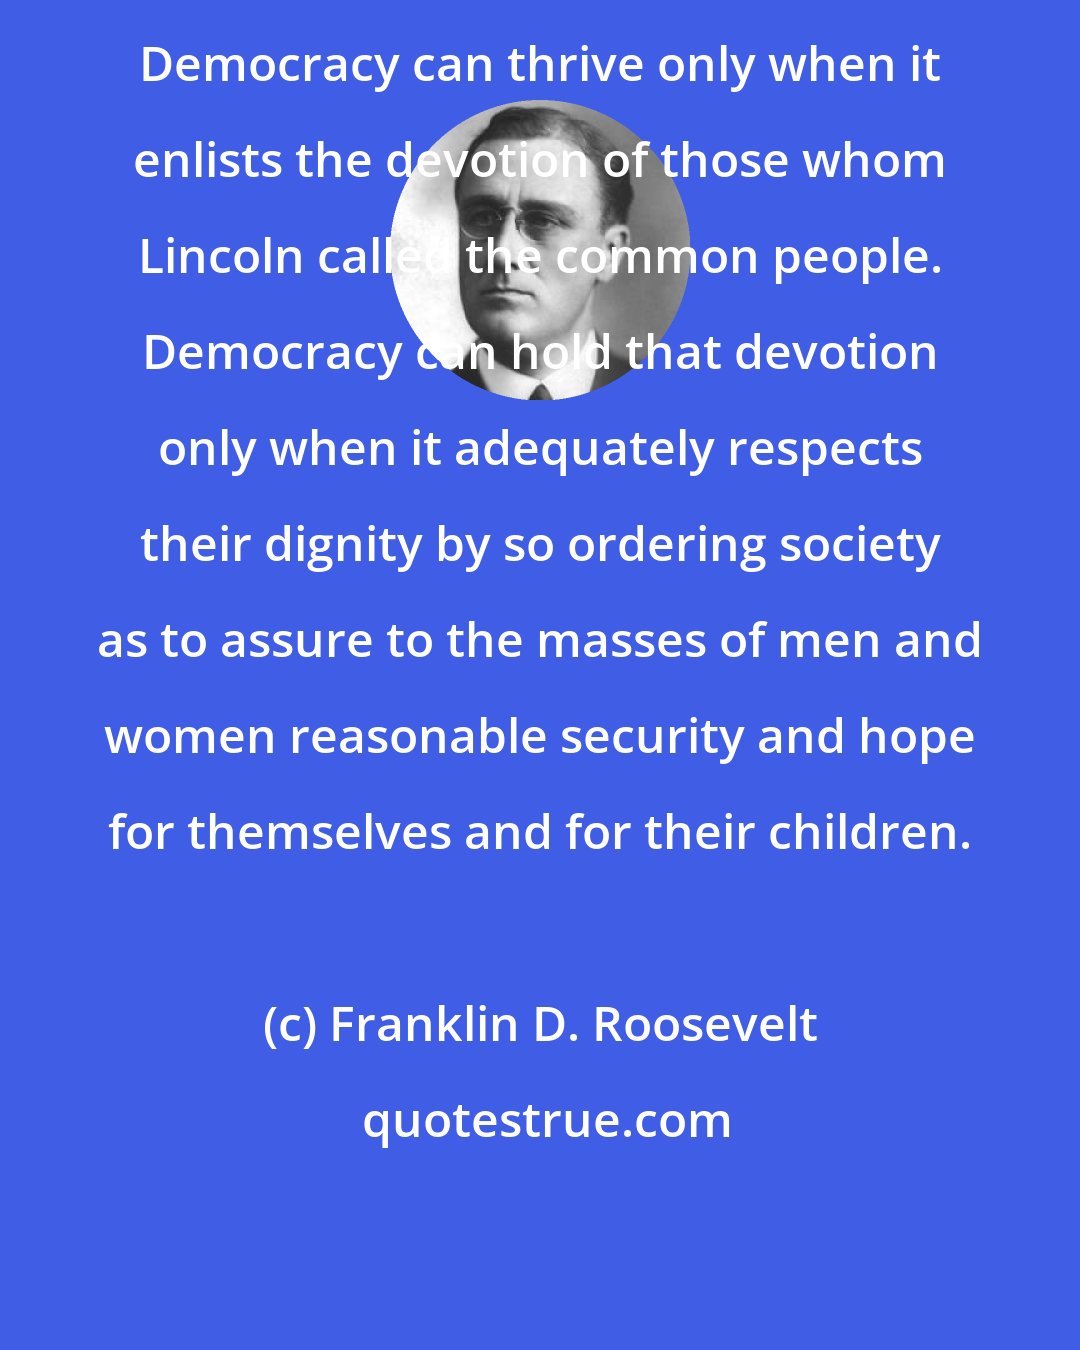 Franklin D. Roosevelt: Democracy can thrive only when it enlists the devotion of those whom Lincoln called the common people. Democracy can hold that devotion only when it adequately respects their dignity by so ordering society as to assure to the masses of men and women reasonable security and hope for themselves and for their children.